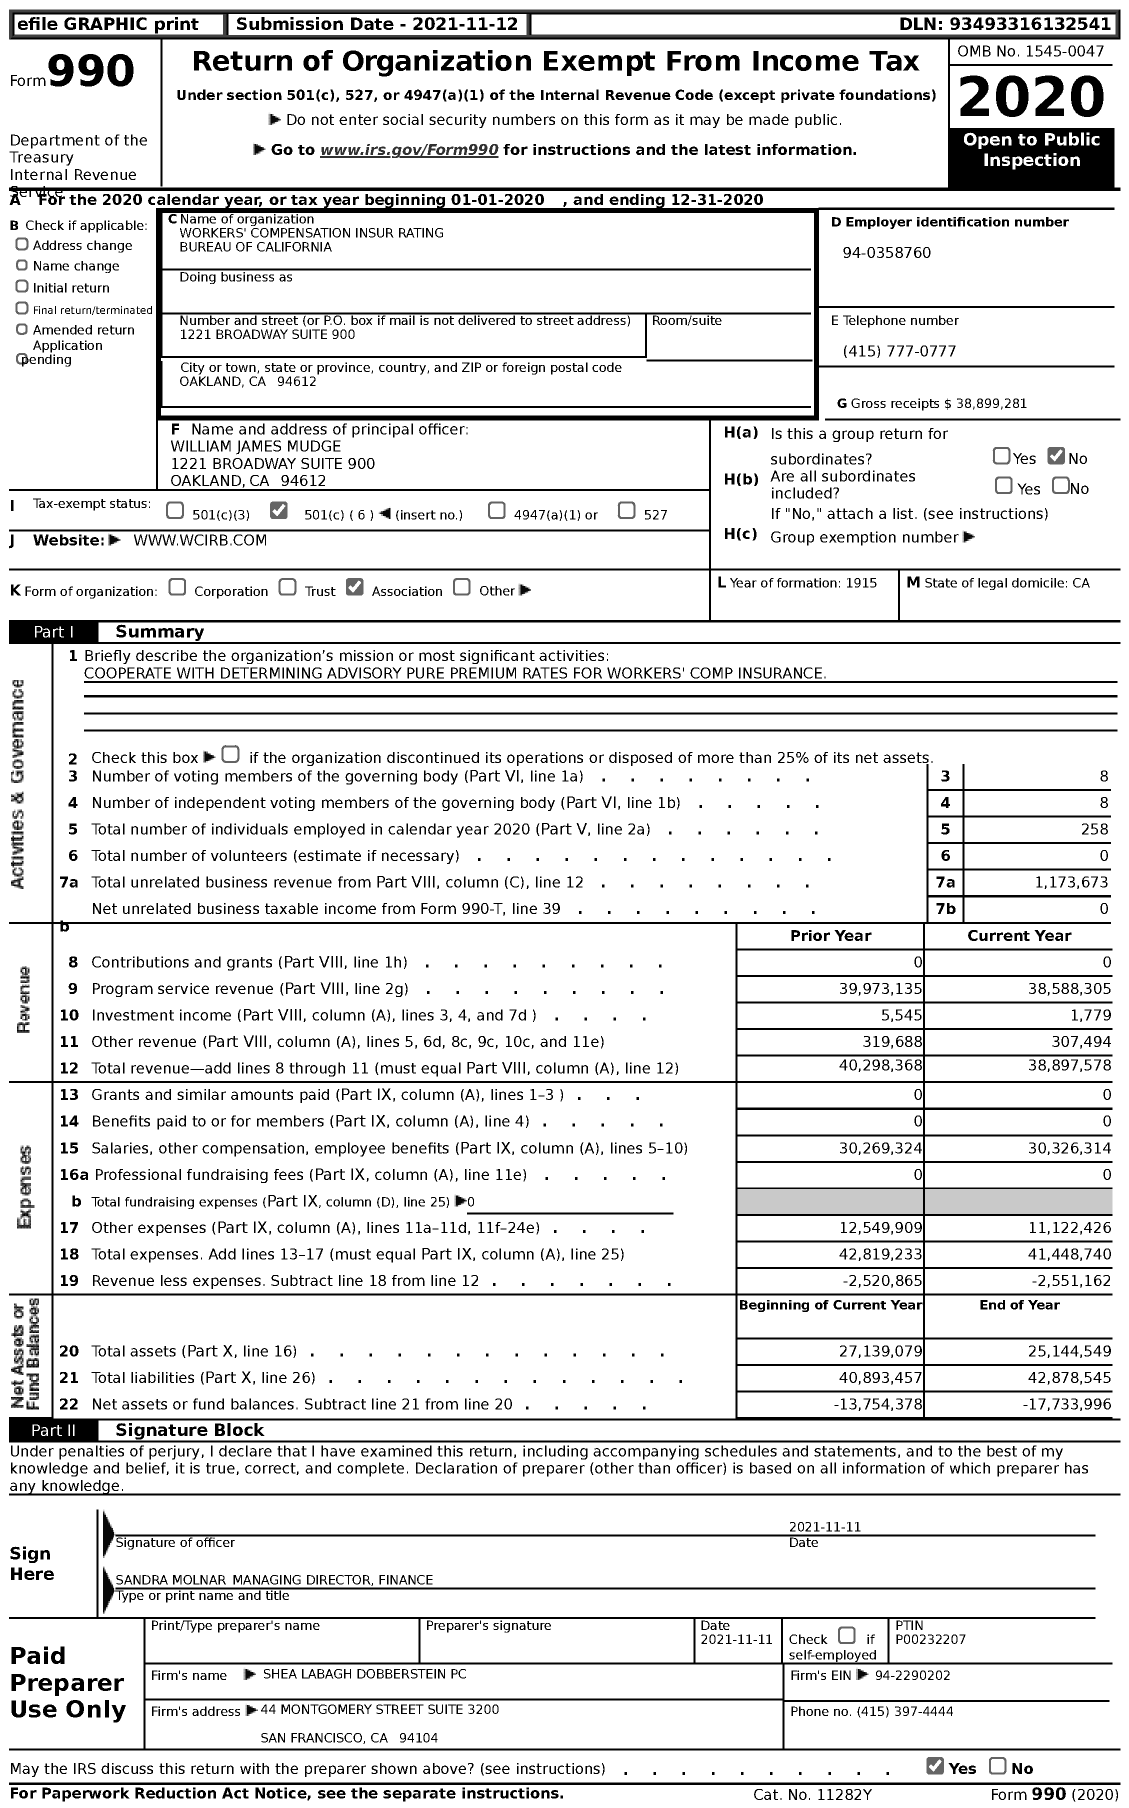 Image of first page of 2020 Form 990 for Workers' Compensation Insur Rating Bureau of California